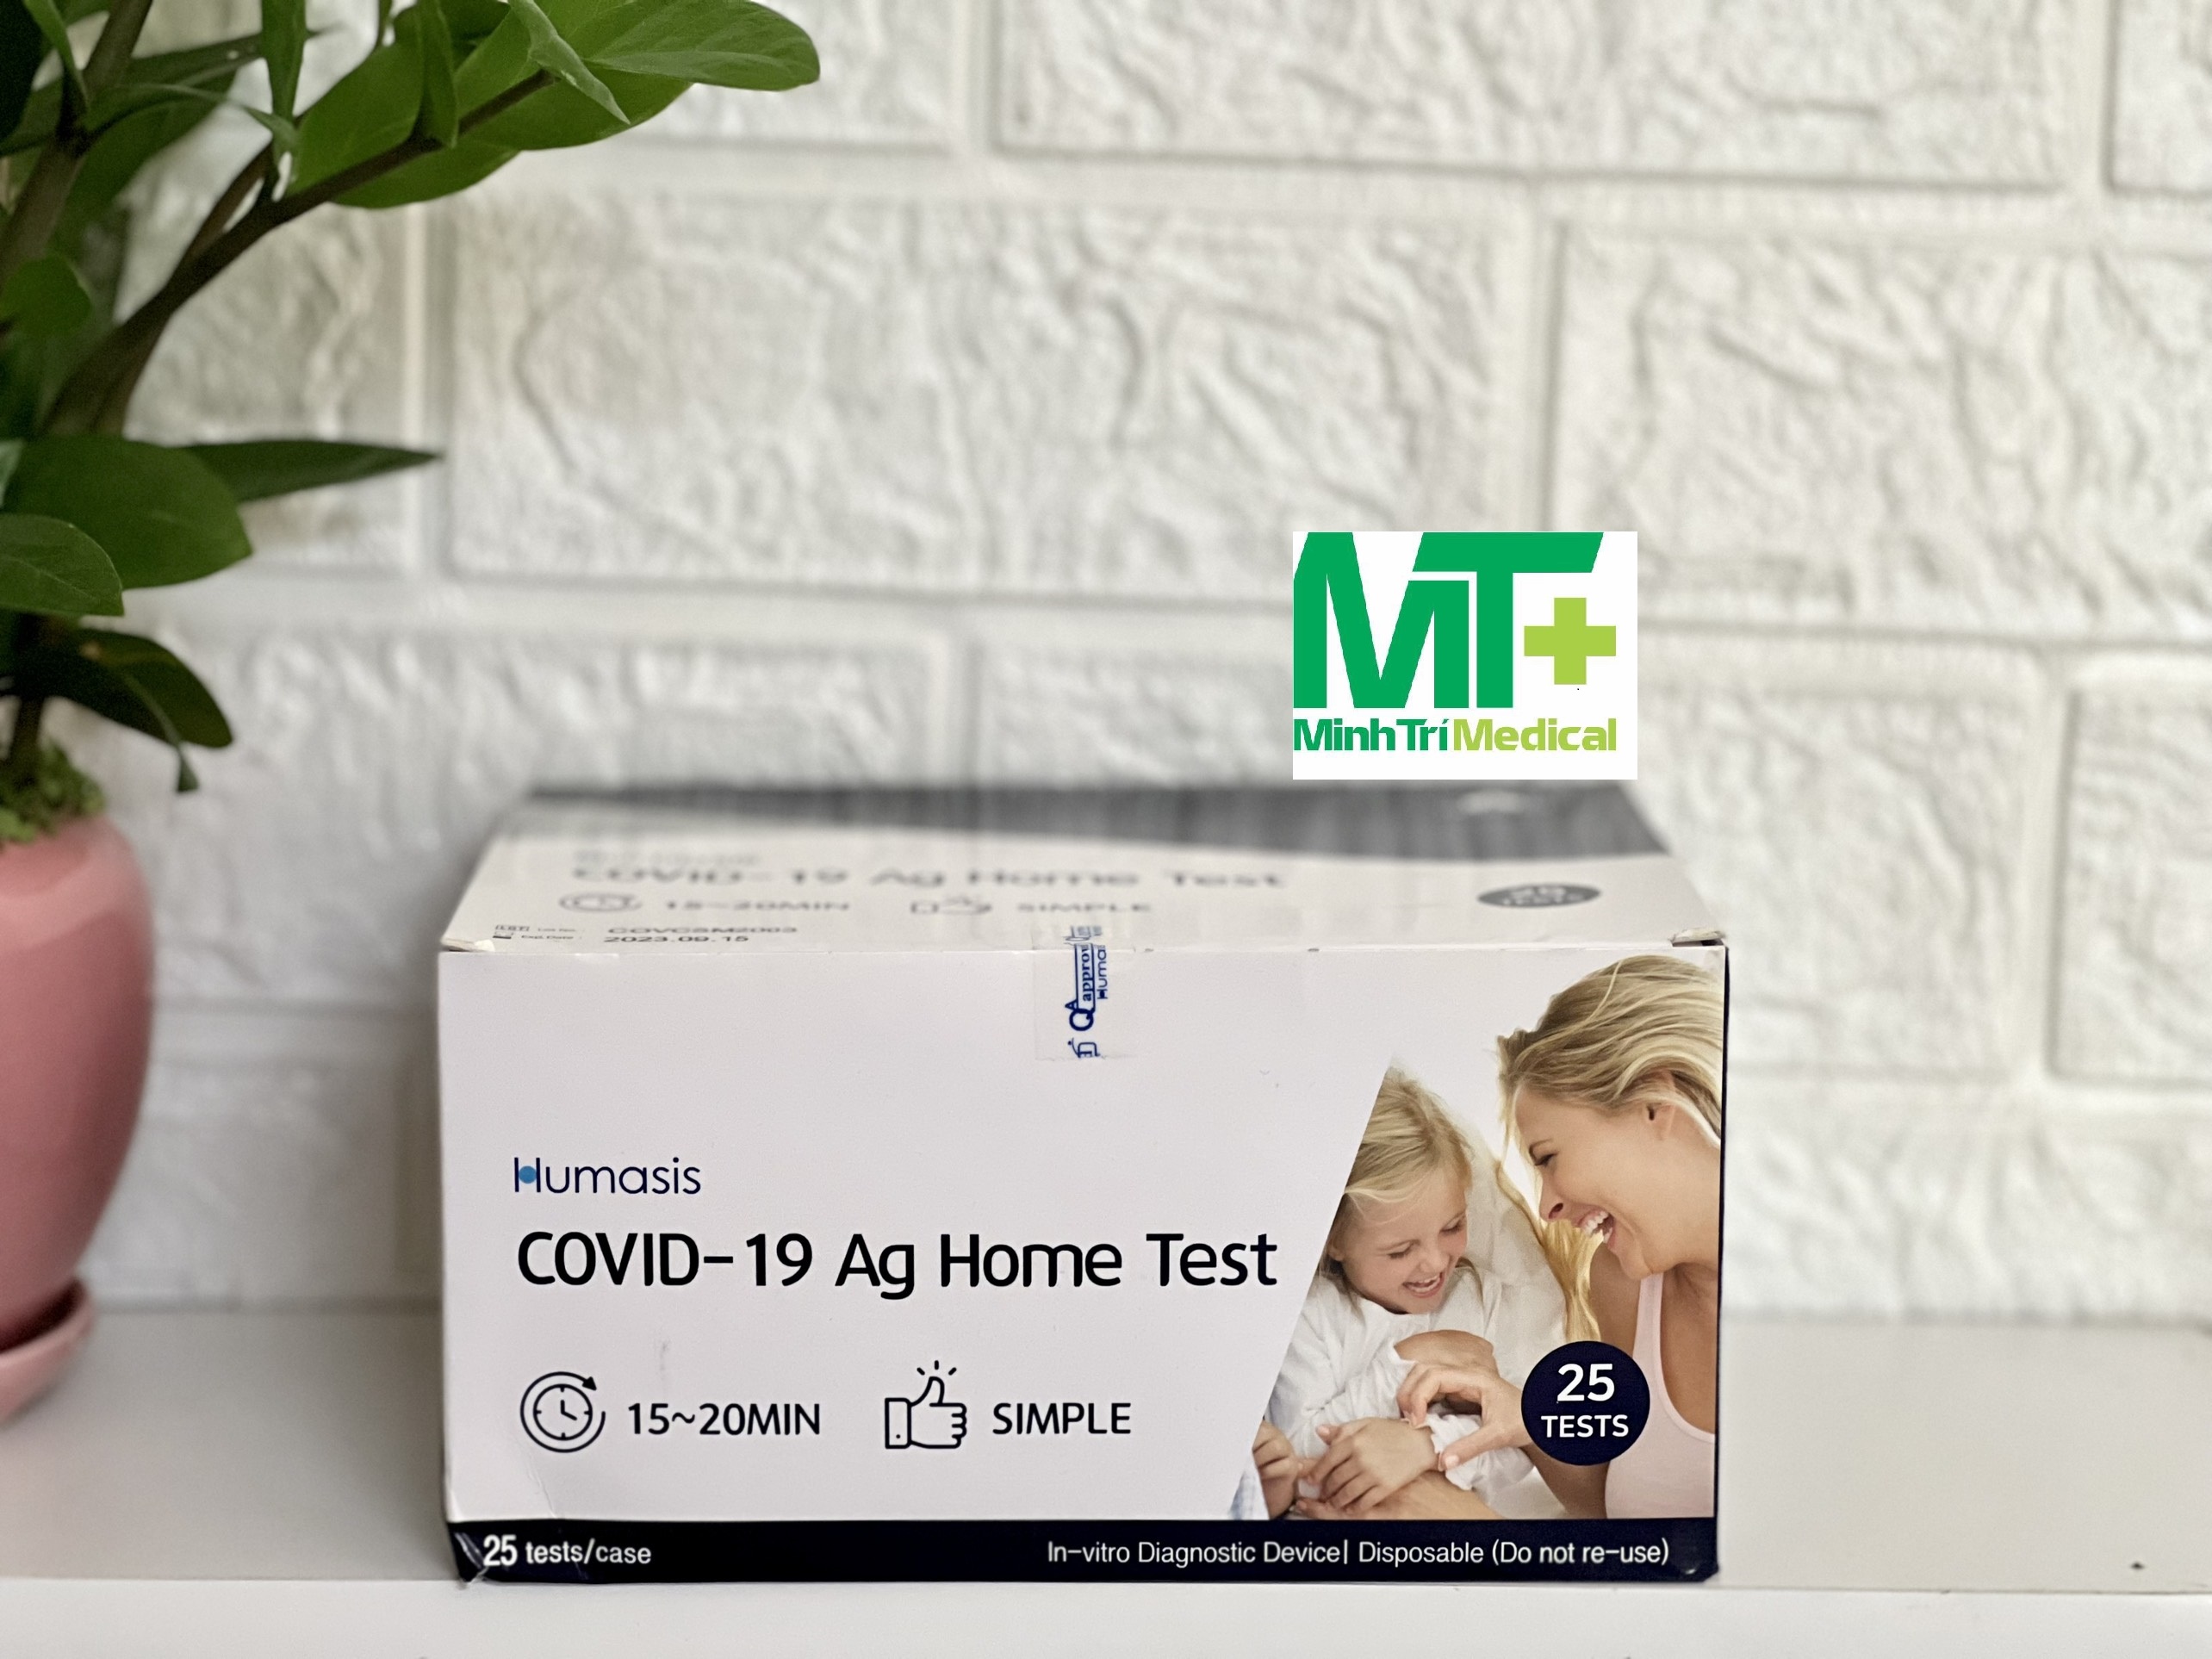 Humasis COVID-19 Ag Home Test Kit Hộp 25 bộ test